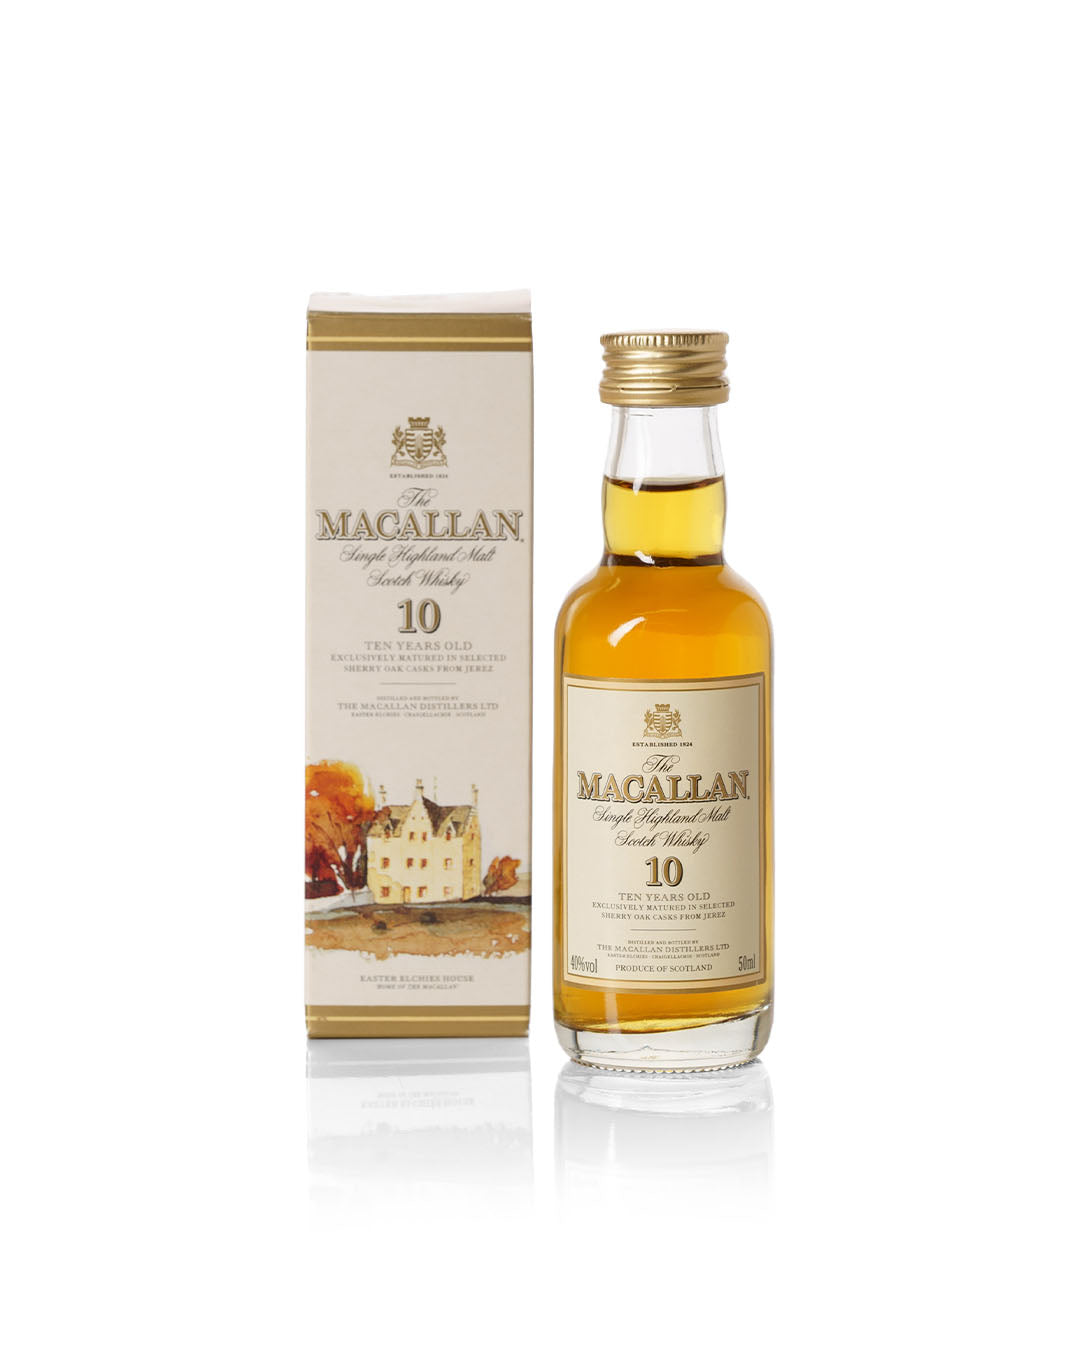 Macallan 10 Year Old Bottled Early 2000's 50ml Miniature With Original Box